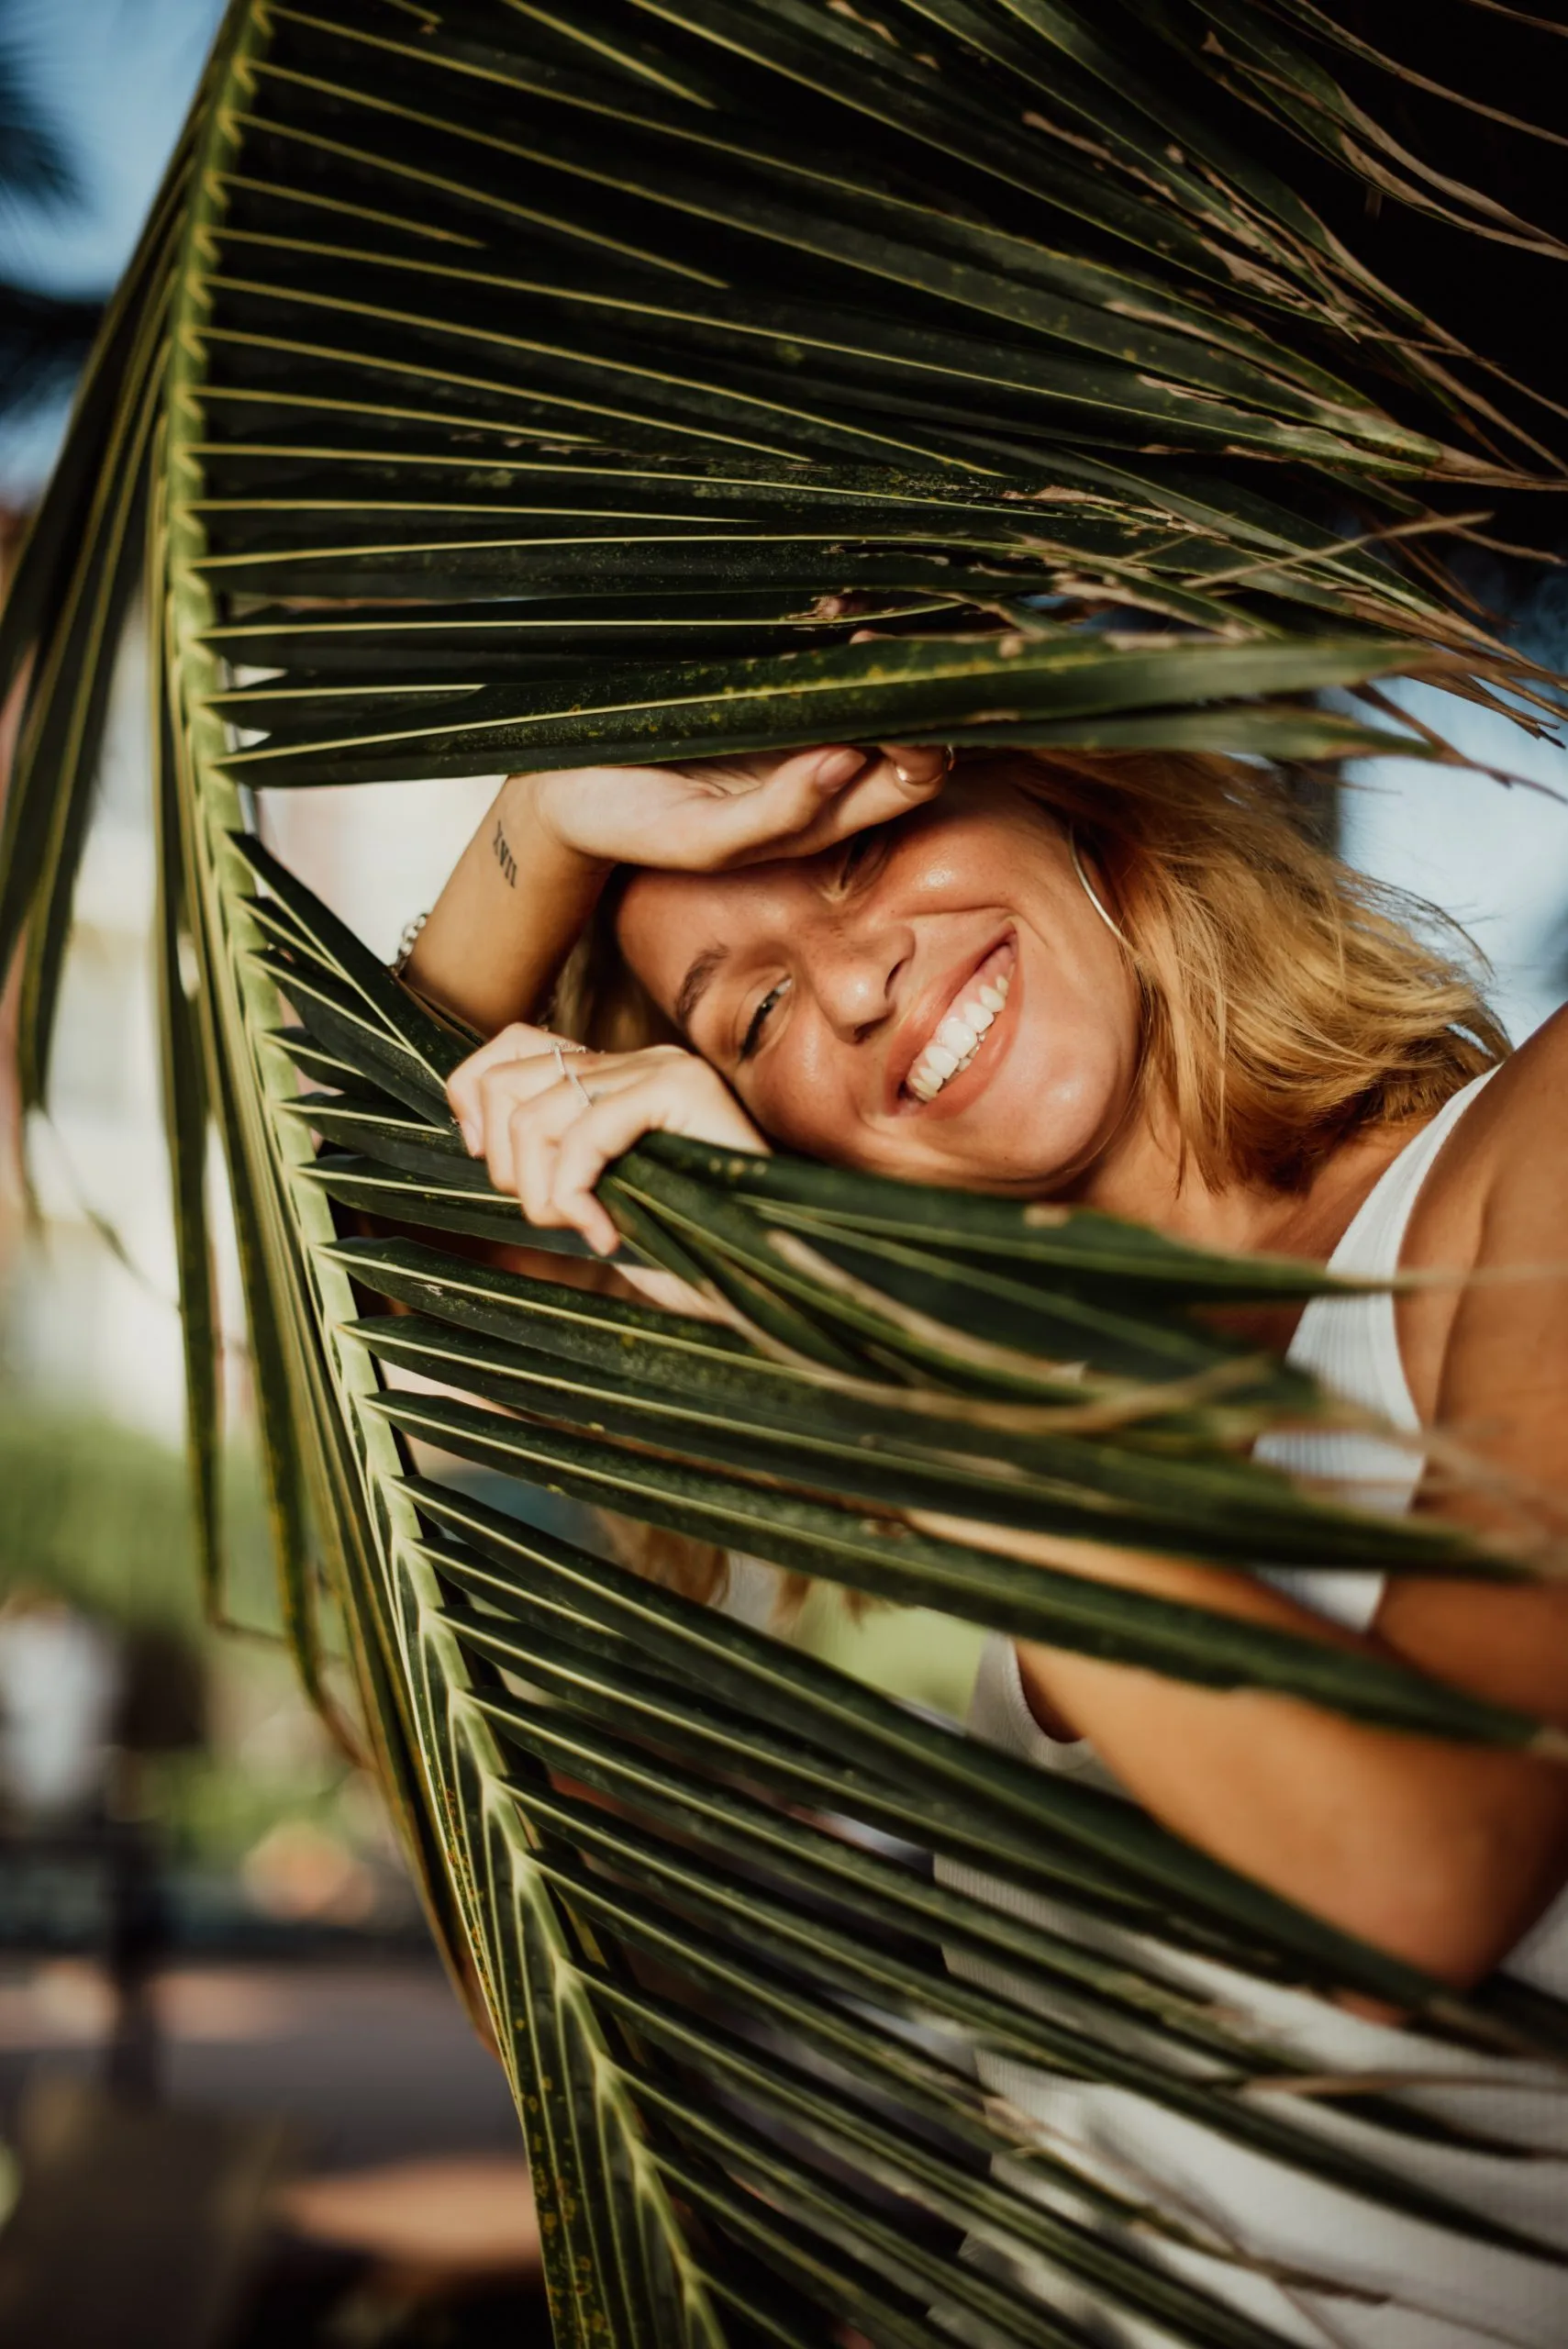 A woman with blonde hair smiles brightly, peeking through large, green palm fronds. She is wearing a white sleeveless top and appears joyful and relaxed. The background is blurred, suggesting an outdoor, tropical setting.